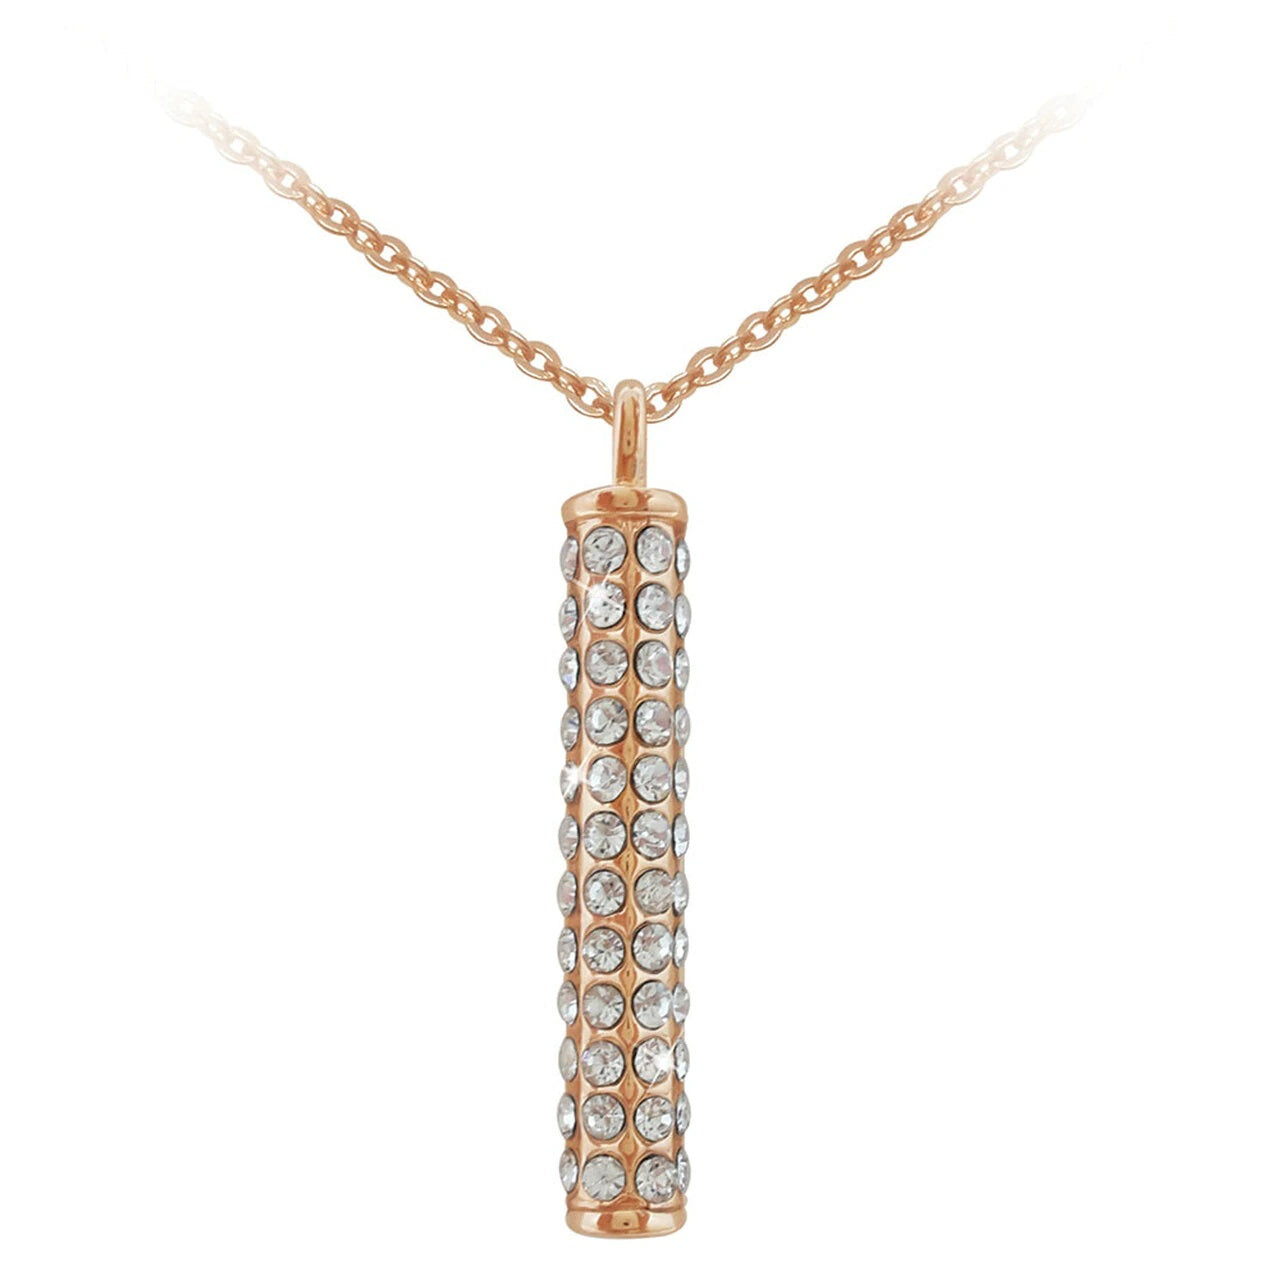 Tipperary Crystal Rose Gold Bar Pendant  Simple yet chic, this glistening pendant is an attractive addition to any jewellery collection. Fashioned in on-trend rose gold, the cylindrical drop is daintily suspended from its cable chain.